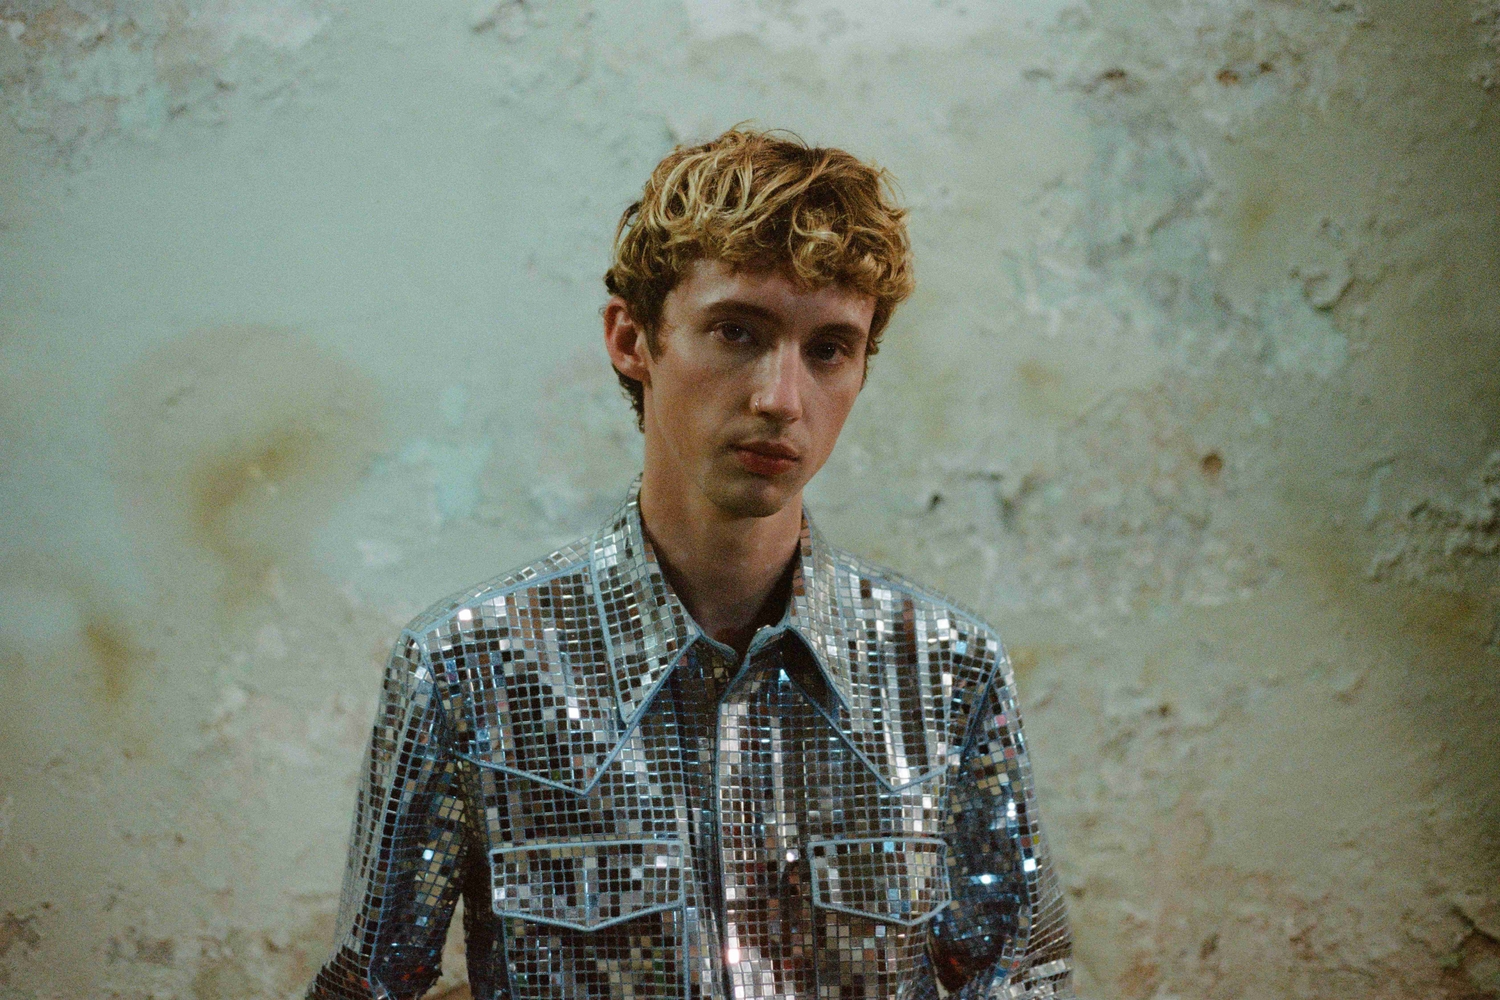 Troye Sivan drops new track ‘Got Me Started’